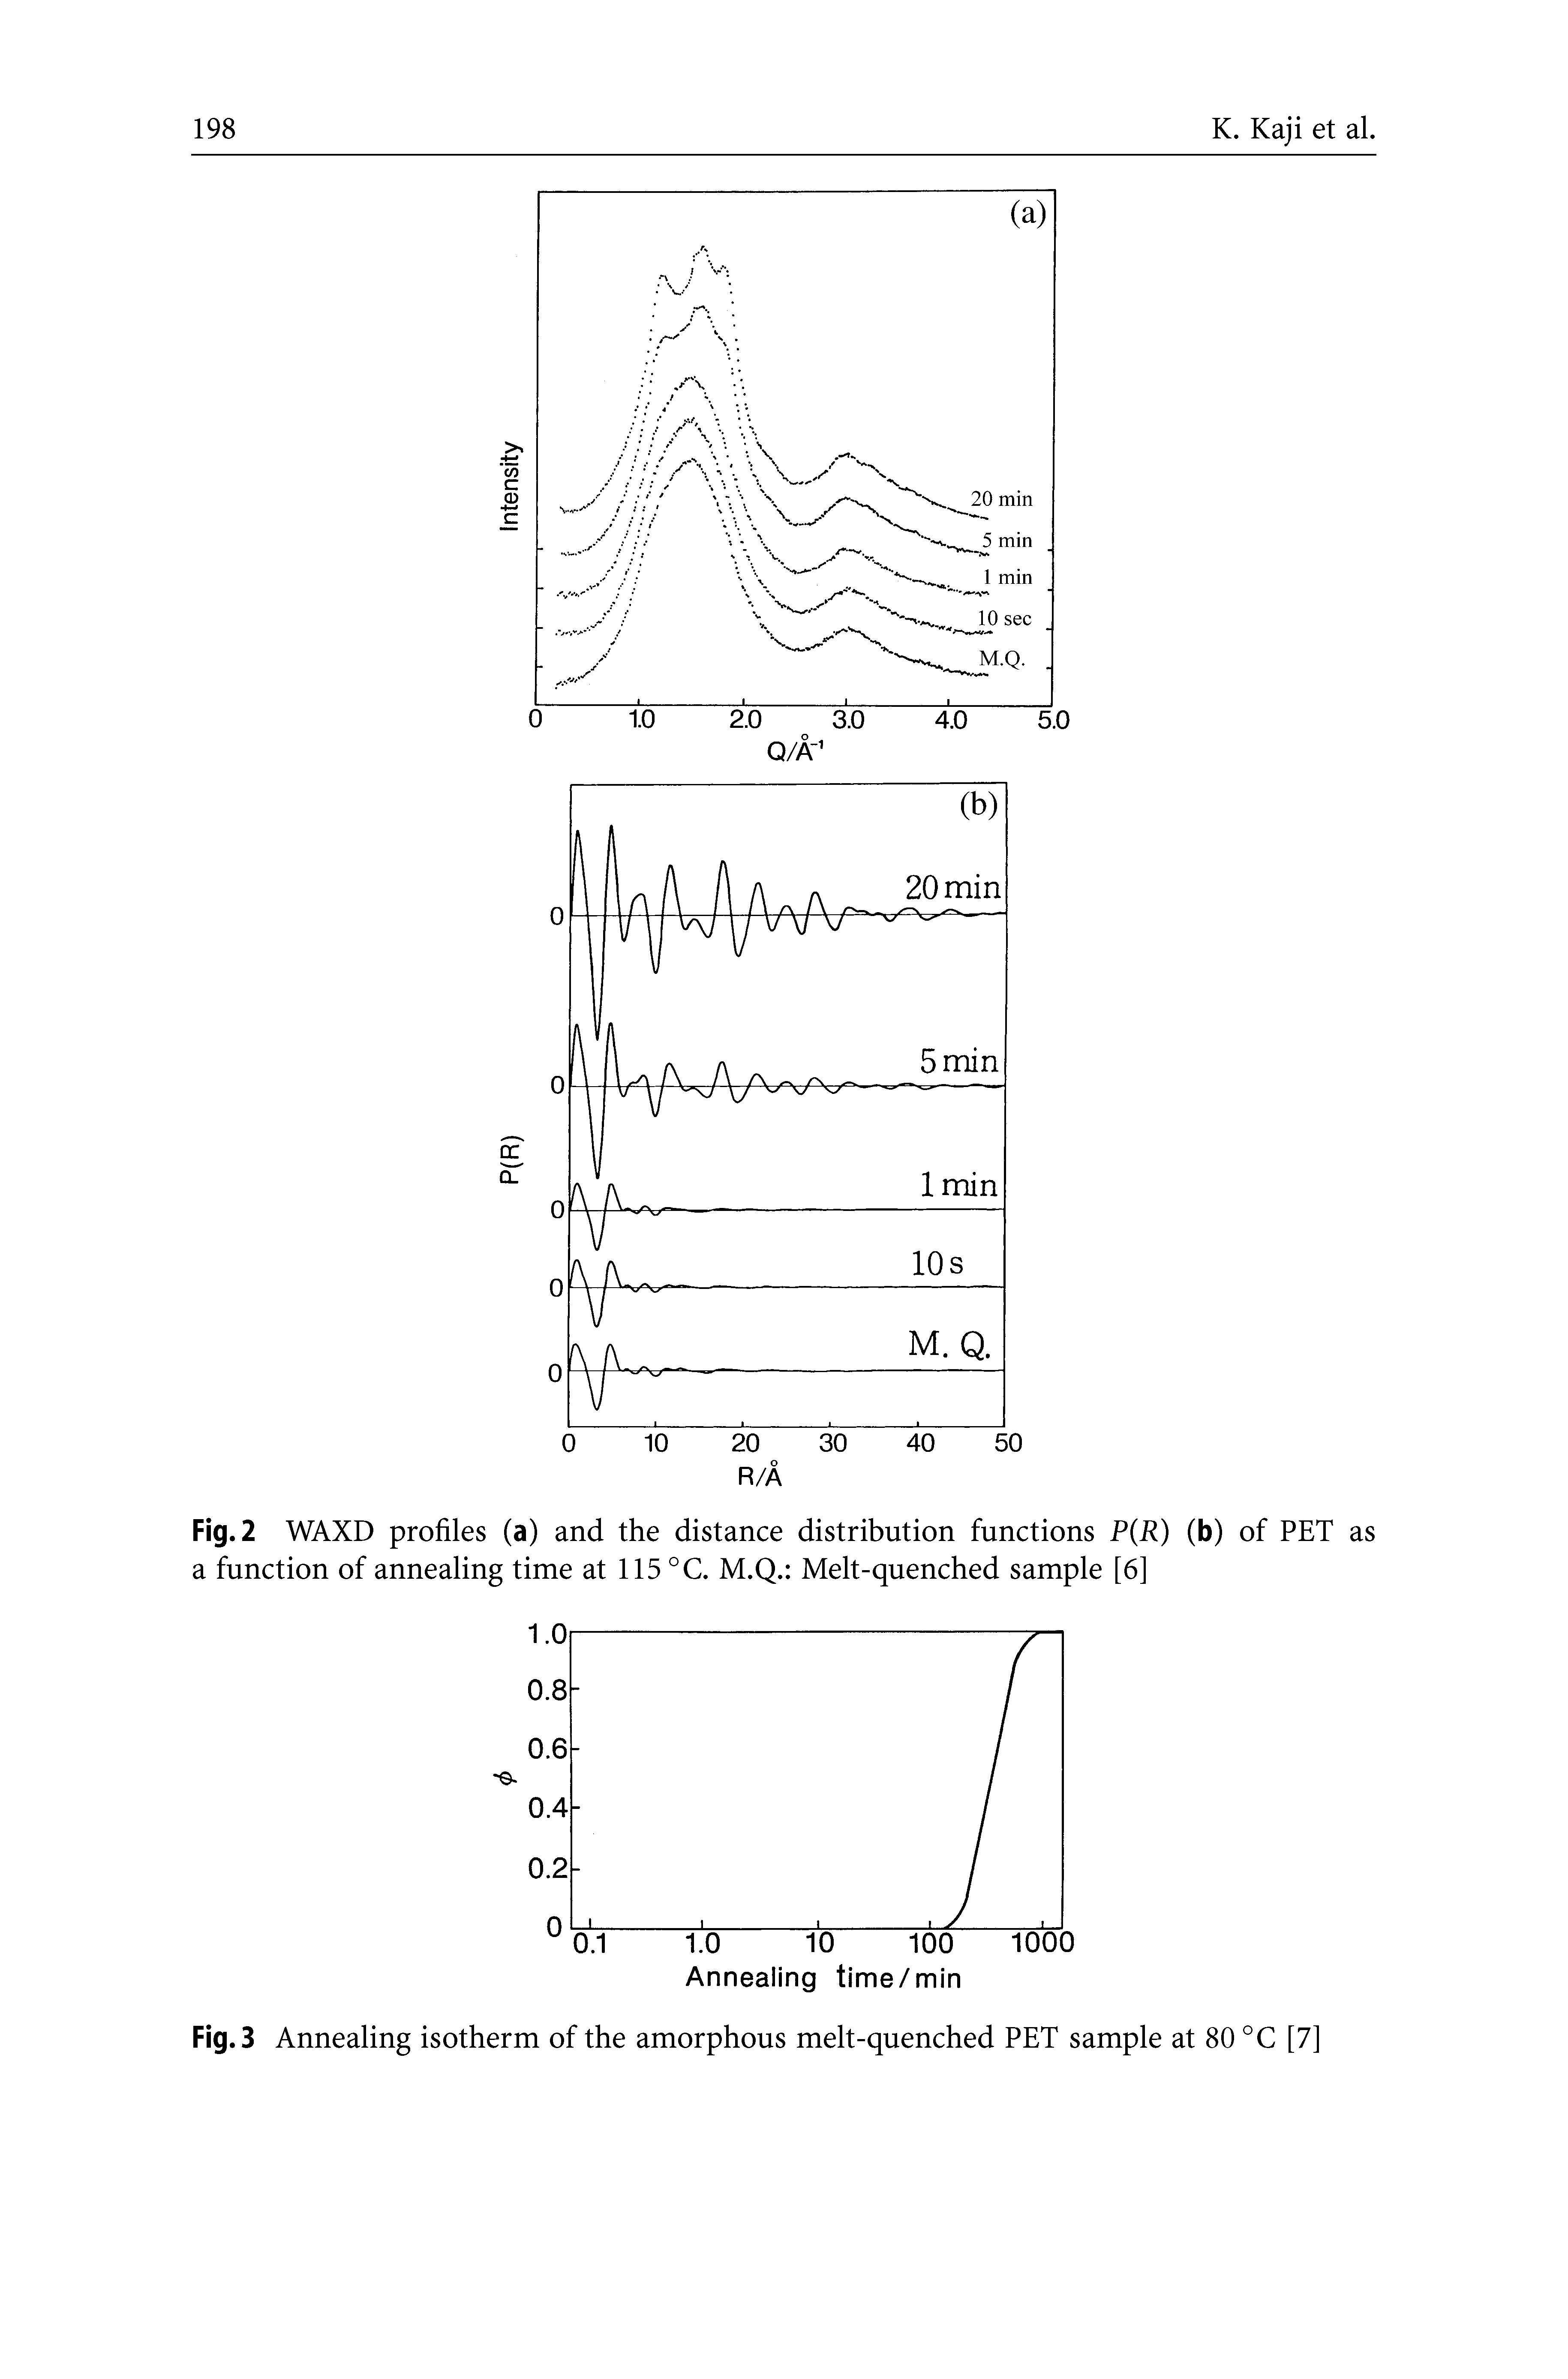 Fig. 3 Annealing isotherm of the amorphous melt-quenched PET sample at 80 °C [7]...